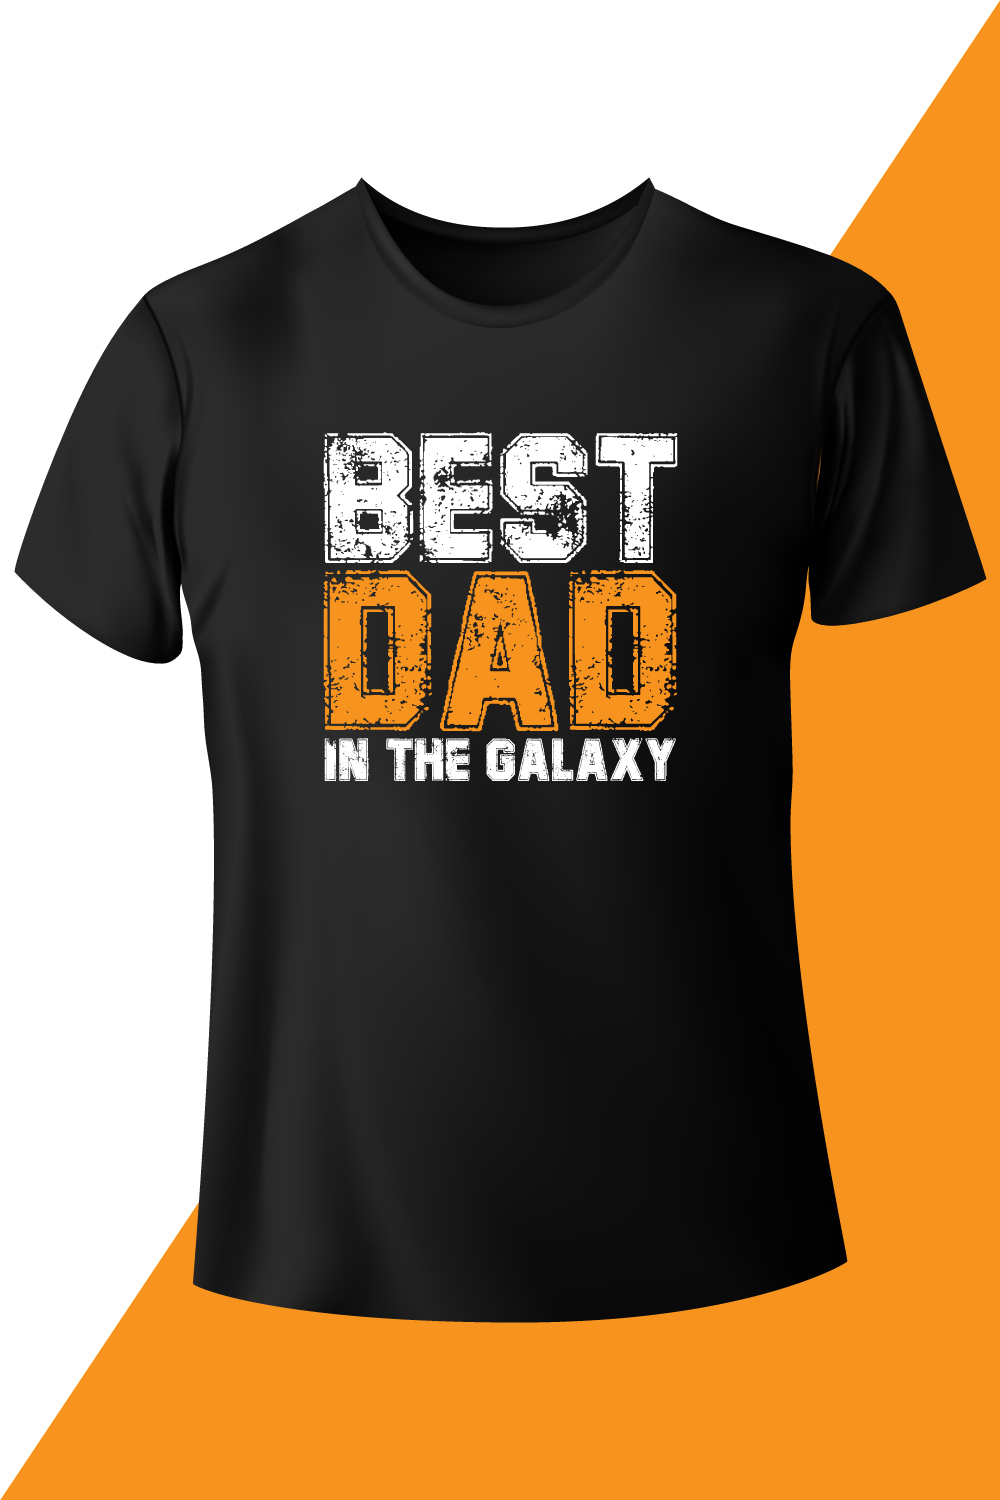 Image with a black t-shirt with a wonderful inscription best dad in the galaxy.